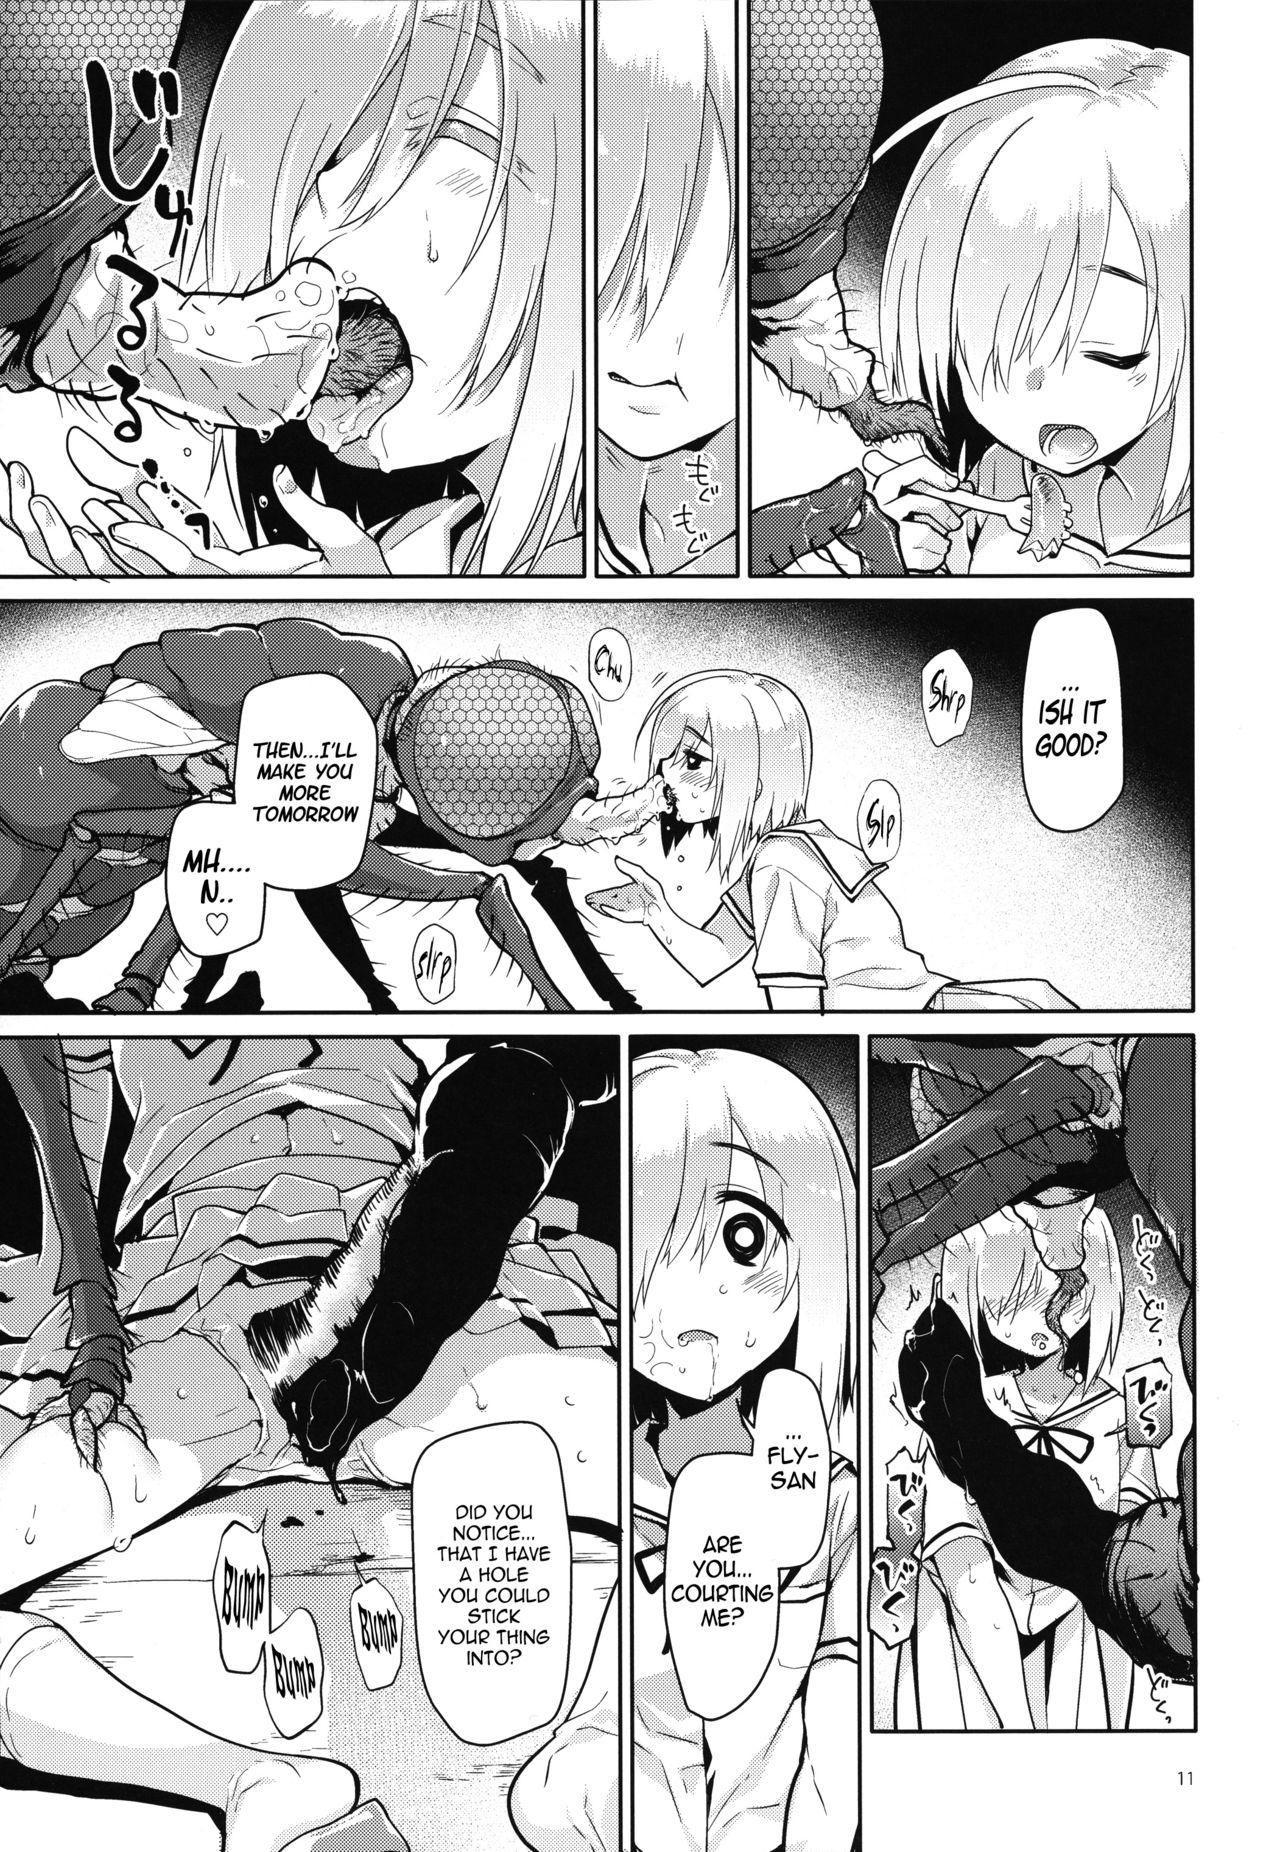 Fresh Uchuujin no Ie - Home of alien Mature Woman - Page 10